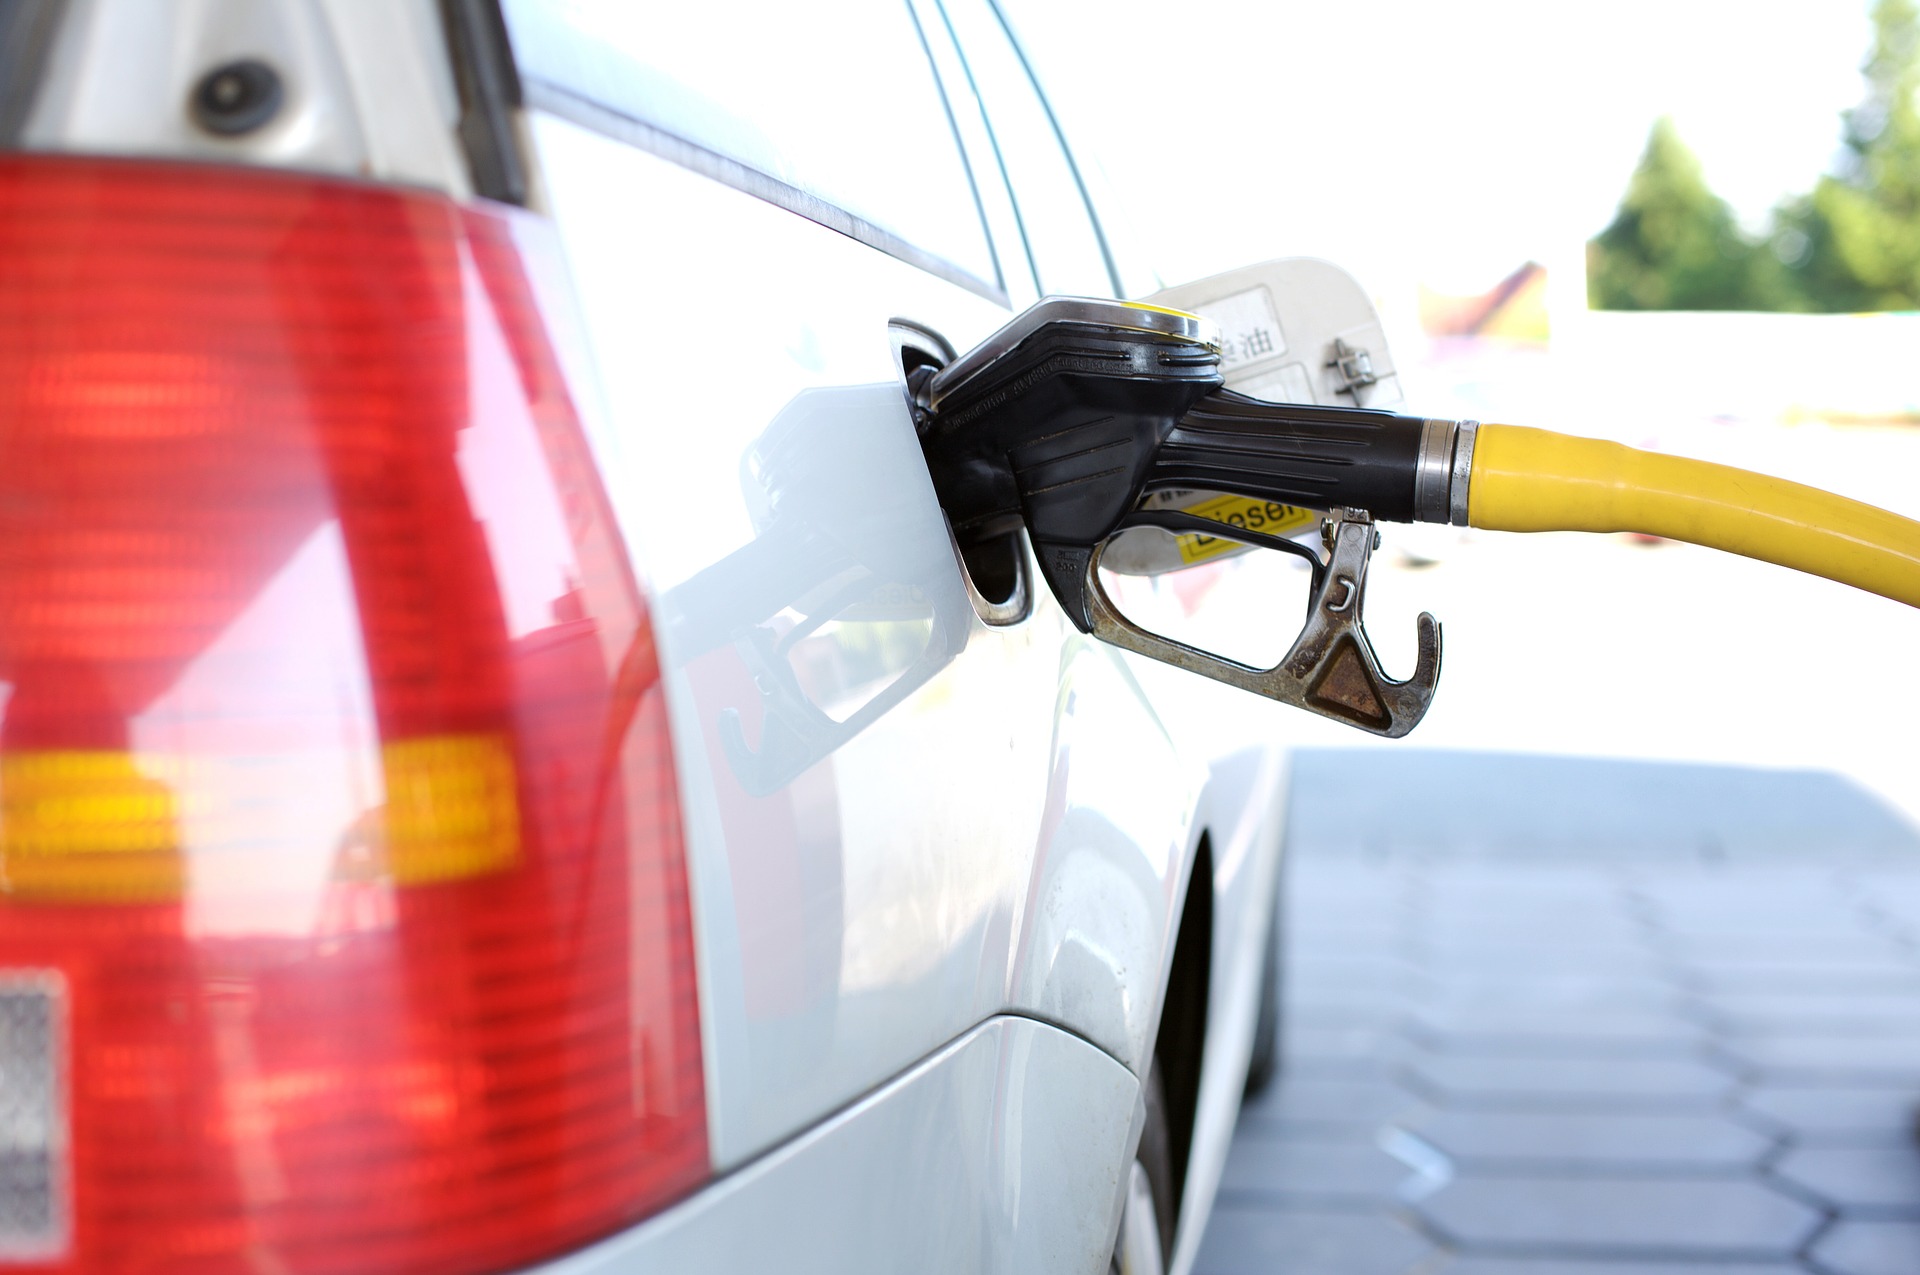 Three gas stations closed due to fuel price maximization